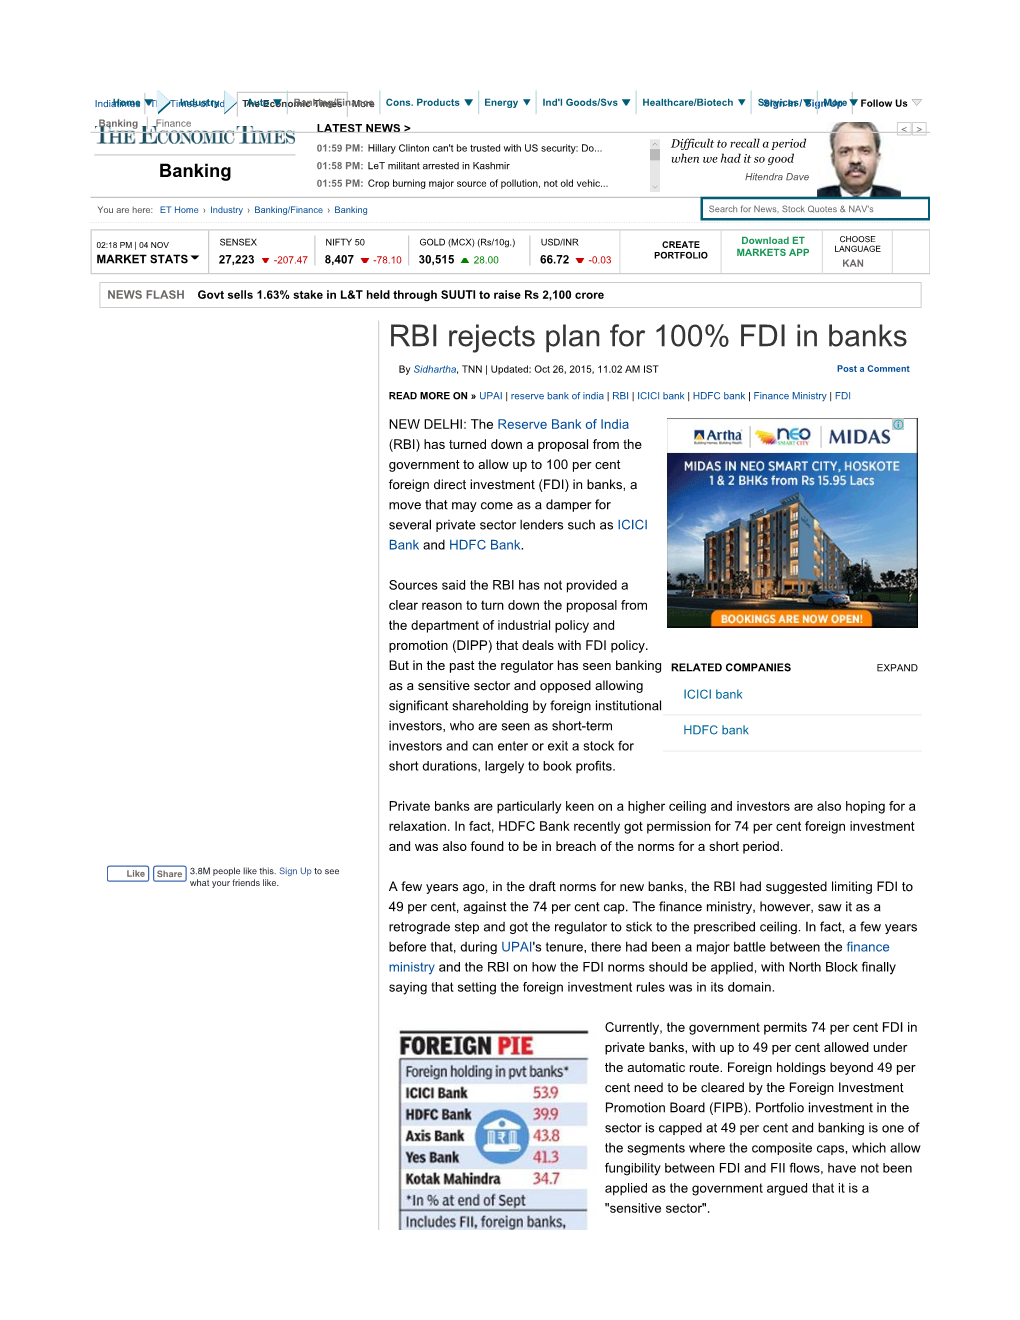 RBI Rejects Plan for 100% FDI in Banks